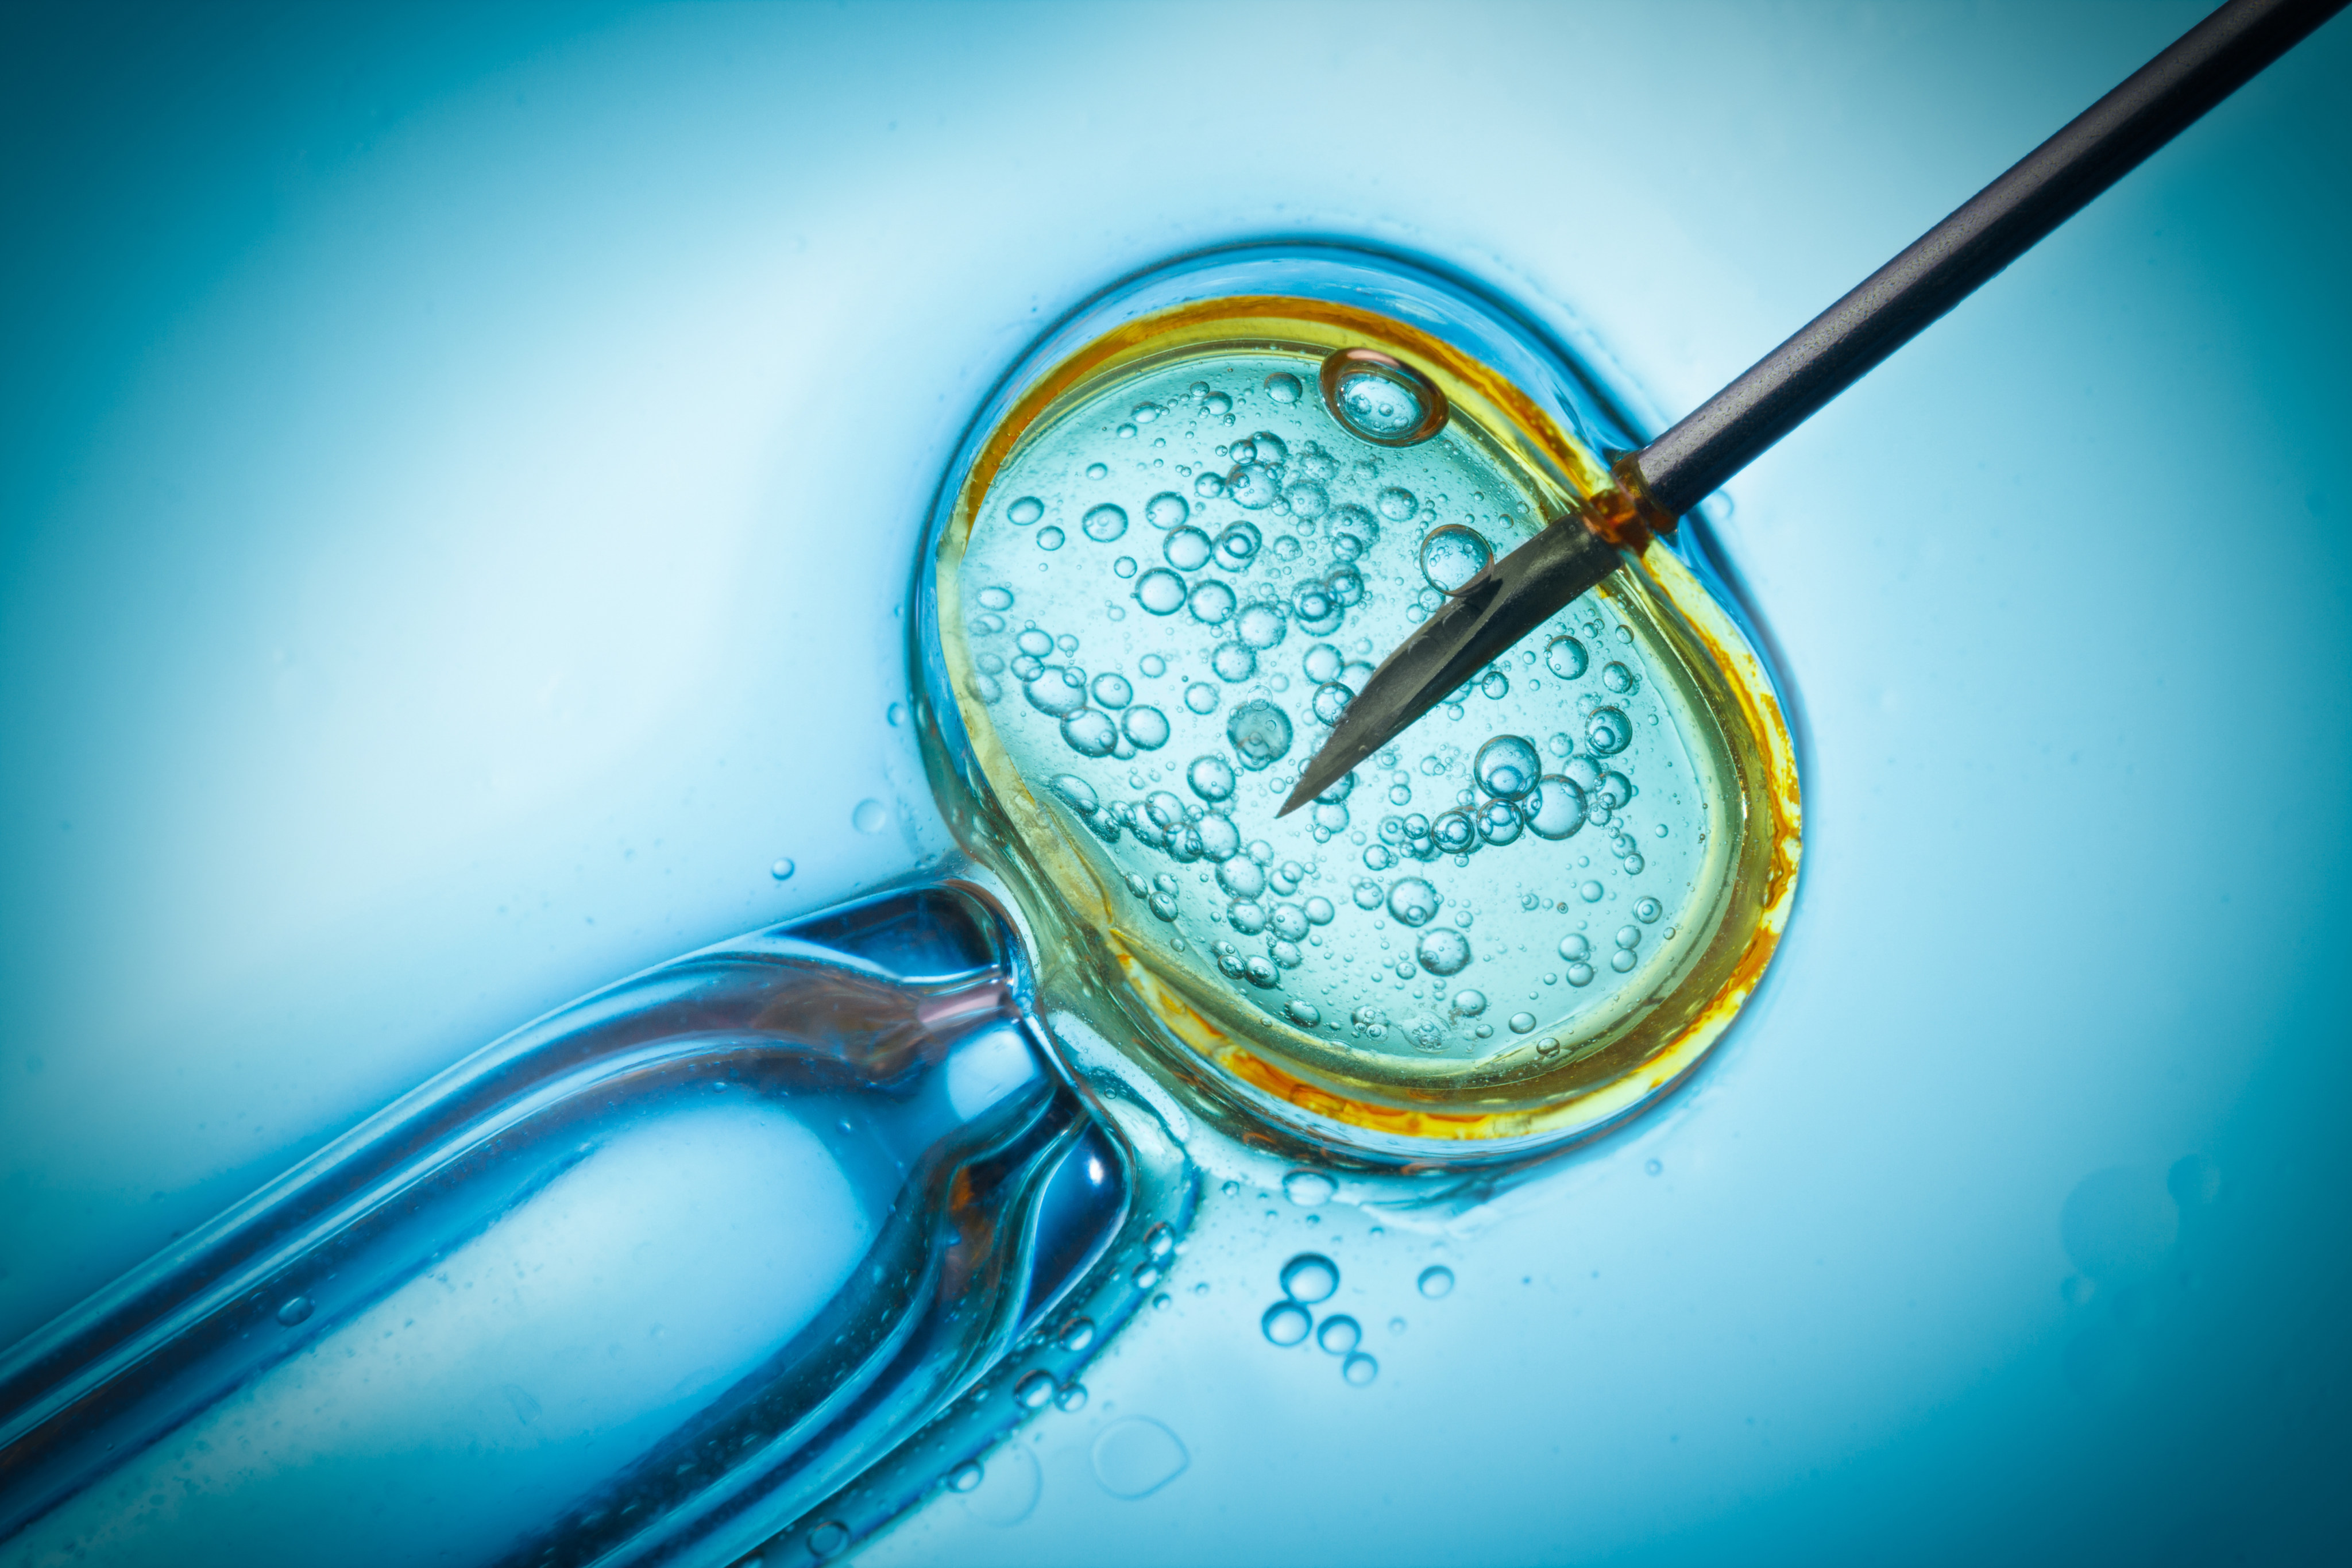 In vitro fertilisation will be added to a Chinese region’s public health insurance, another policy designed to boost births and stem the country’s demographic decline. Photo: Shutterstock